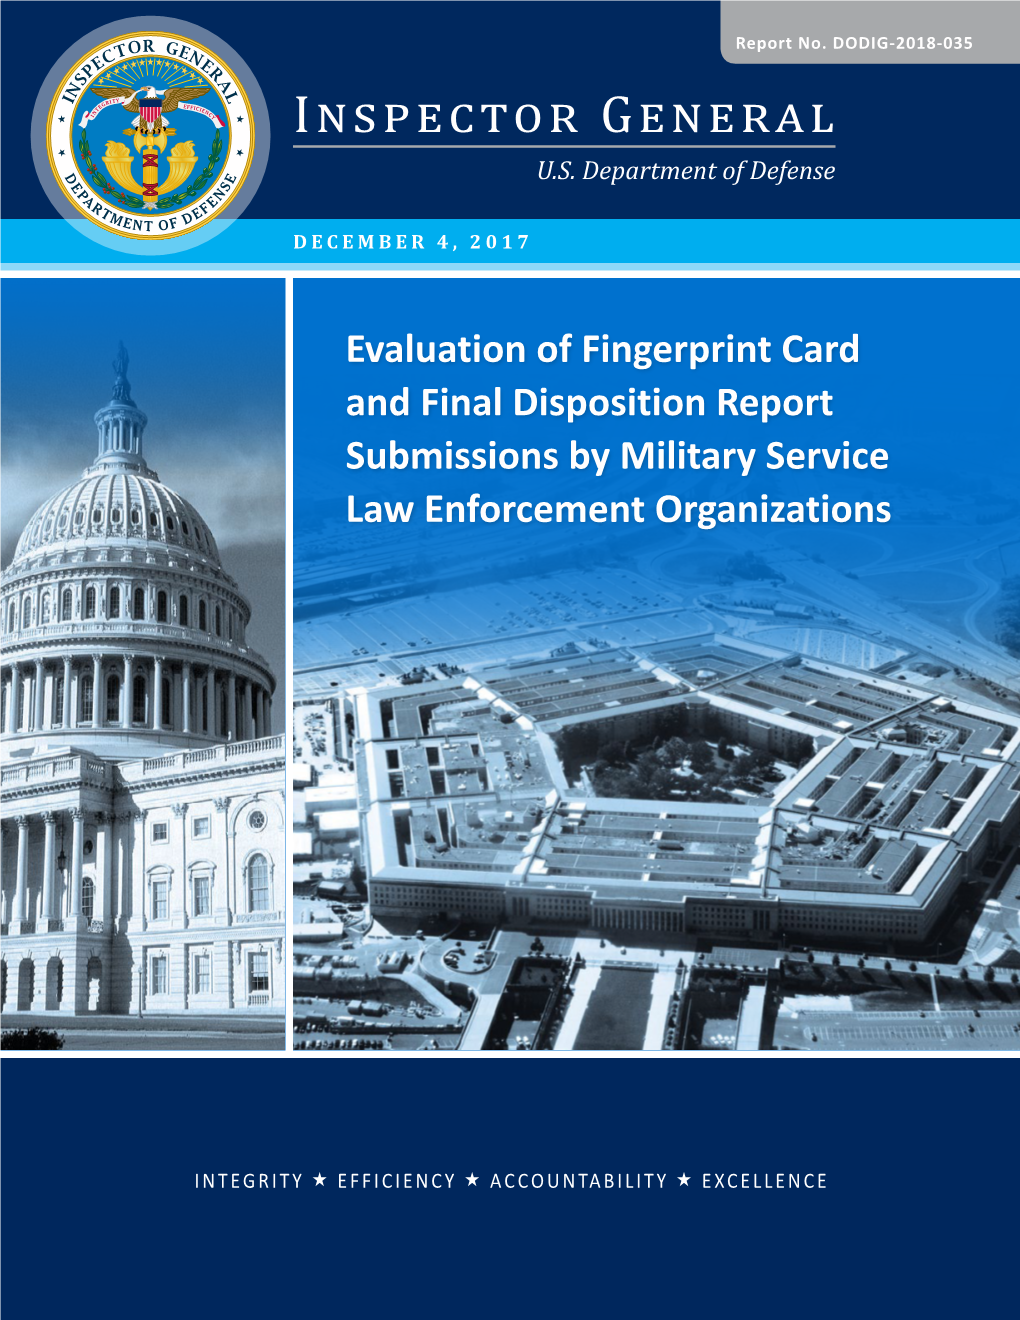 Evaluation of Fingerprint Card and Final Disposition Report Submissions by Military Service Law Enforcement Organizations